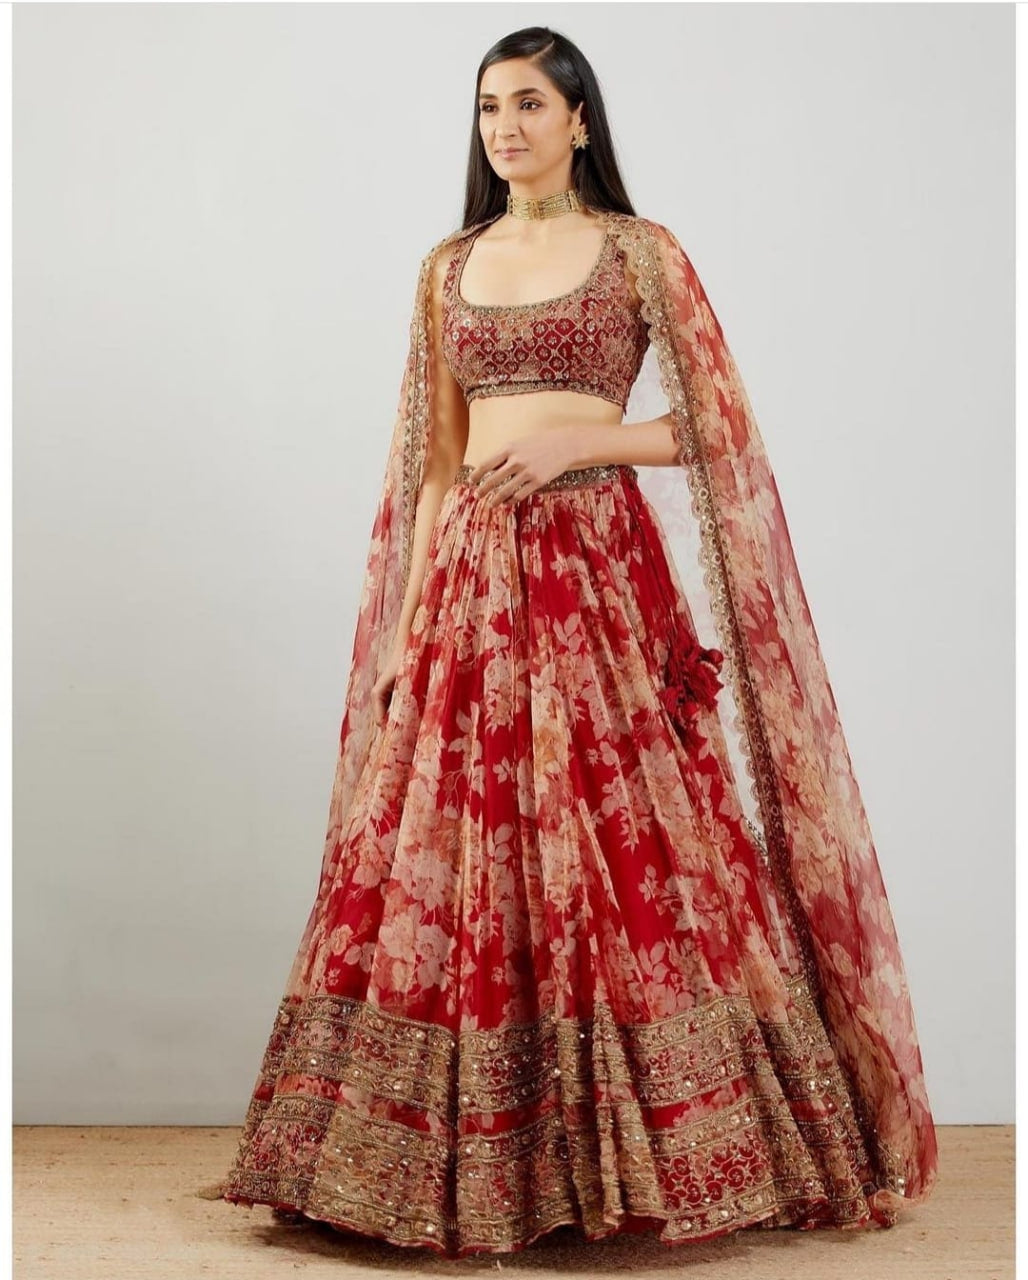 Elegant Red Lehenga Choli adorned with Intricate Thread Sequence Embroidery and Digital Printed Faux Georgette